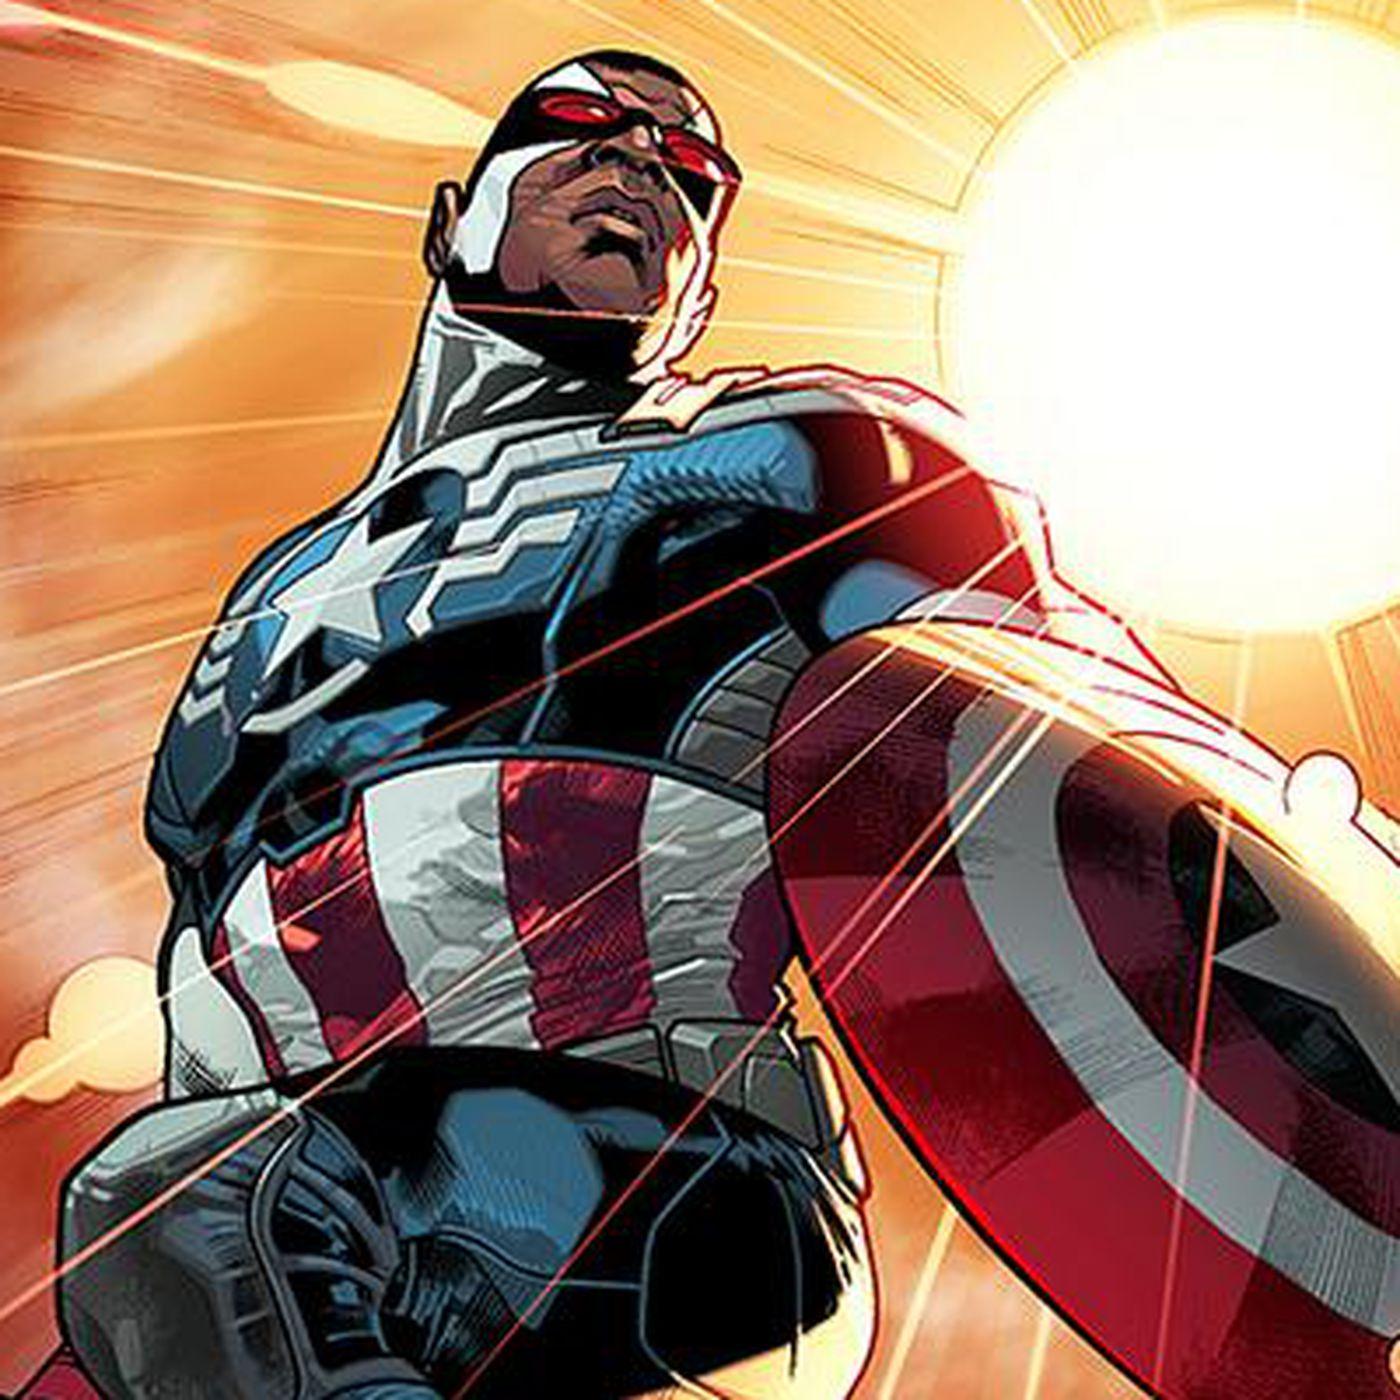 Marvel is replacing Steve Rogers with the new, black Captain